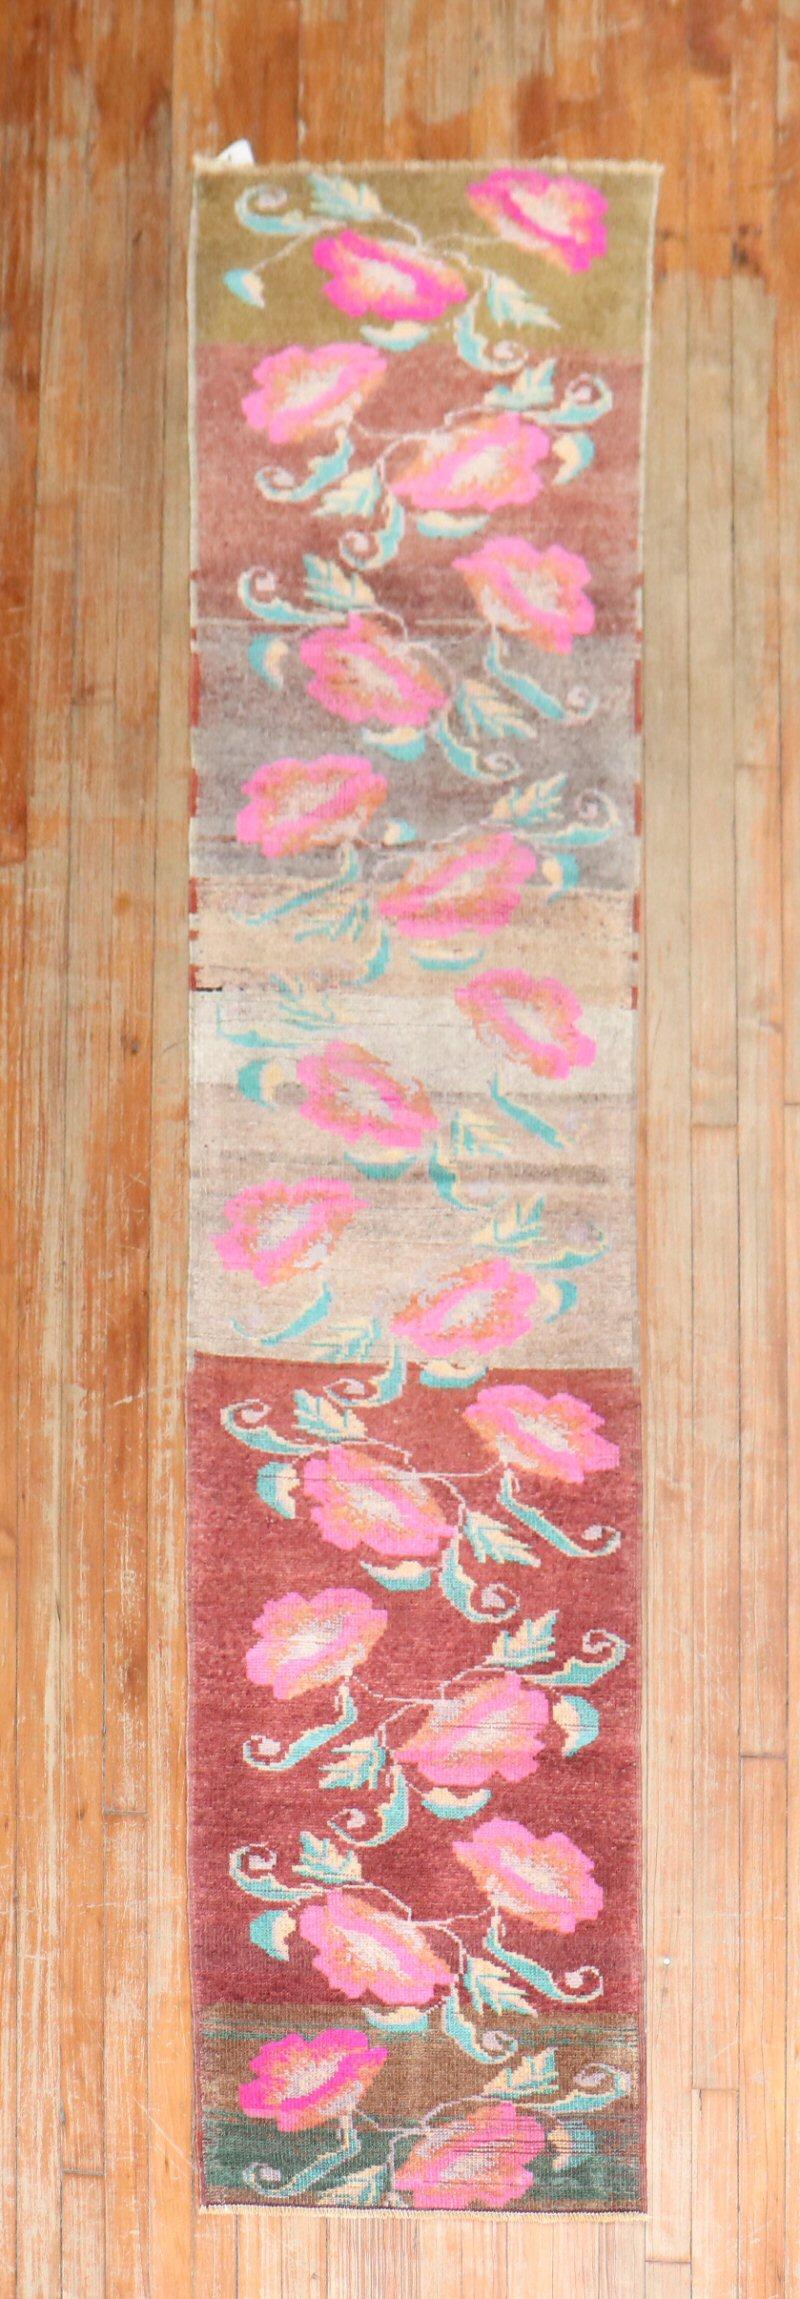 A lovely narrow turkish runner from the middle of the 20th century with a floral flower pattern

Measures: 1'11''x 9'.